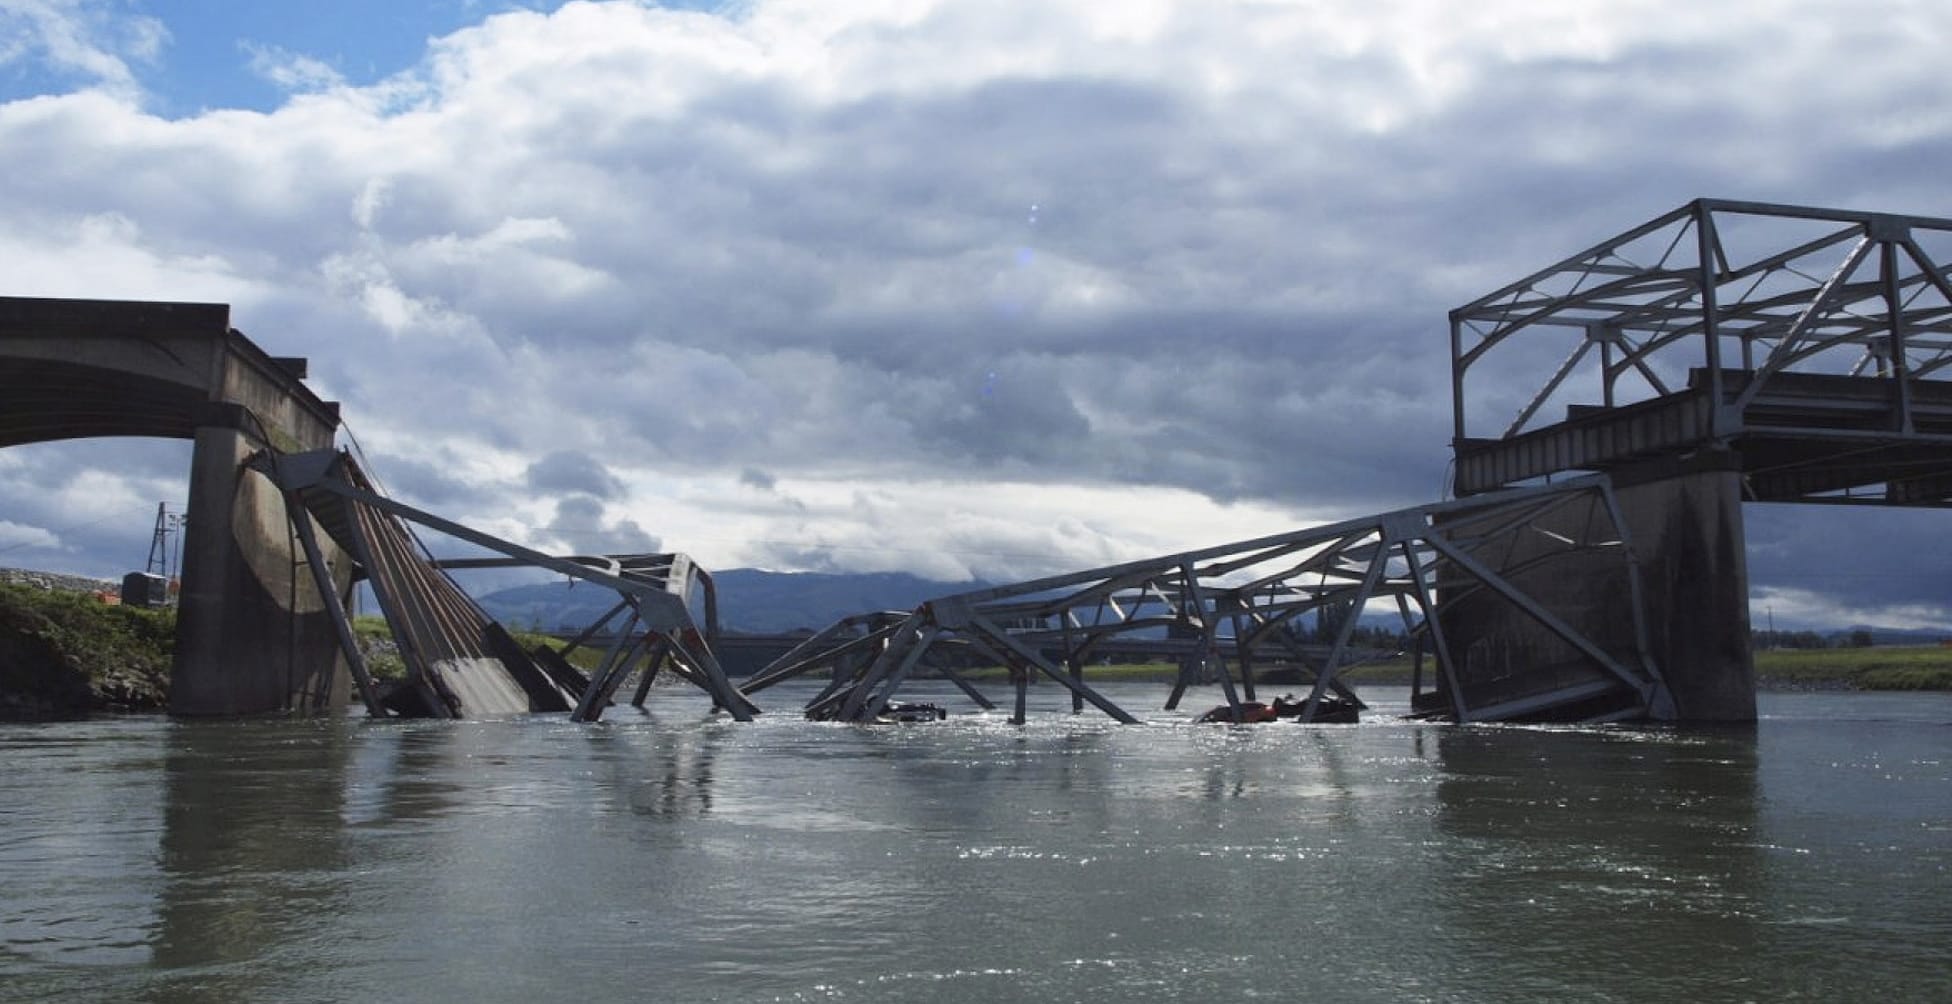 This photo of the Interstate 5 Skagit River Bridge, which collapsed May 23, 2013, is one of more than 2,000 pages of documents, including interviews, cellphone logs and incident reports that are a part of the ongoing investigation into what caused the bridge to collapse.